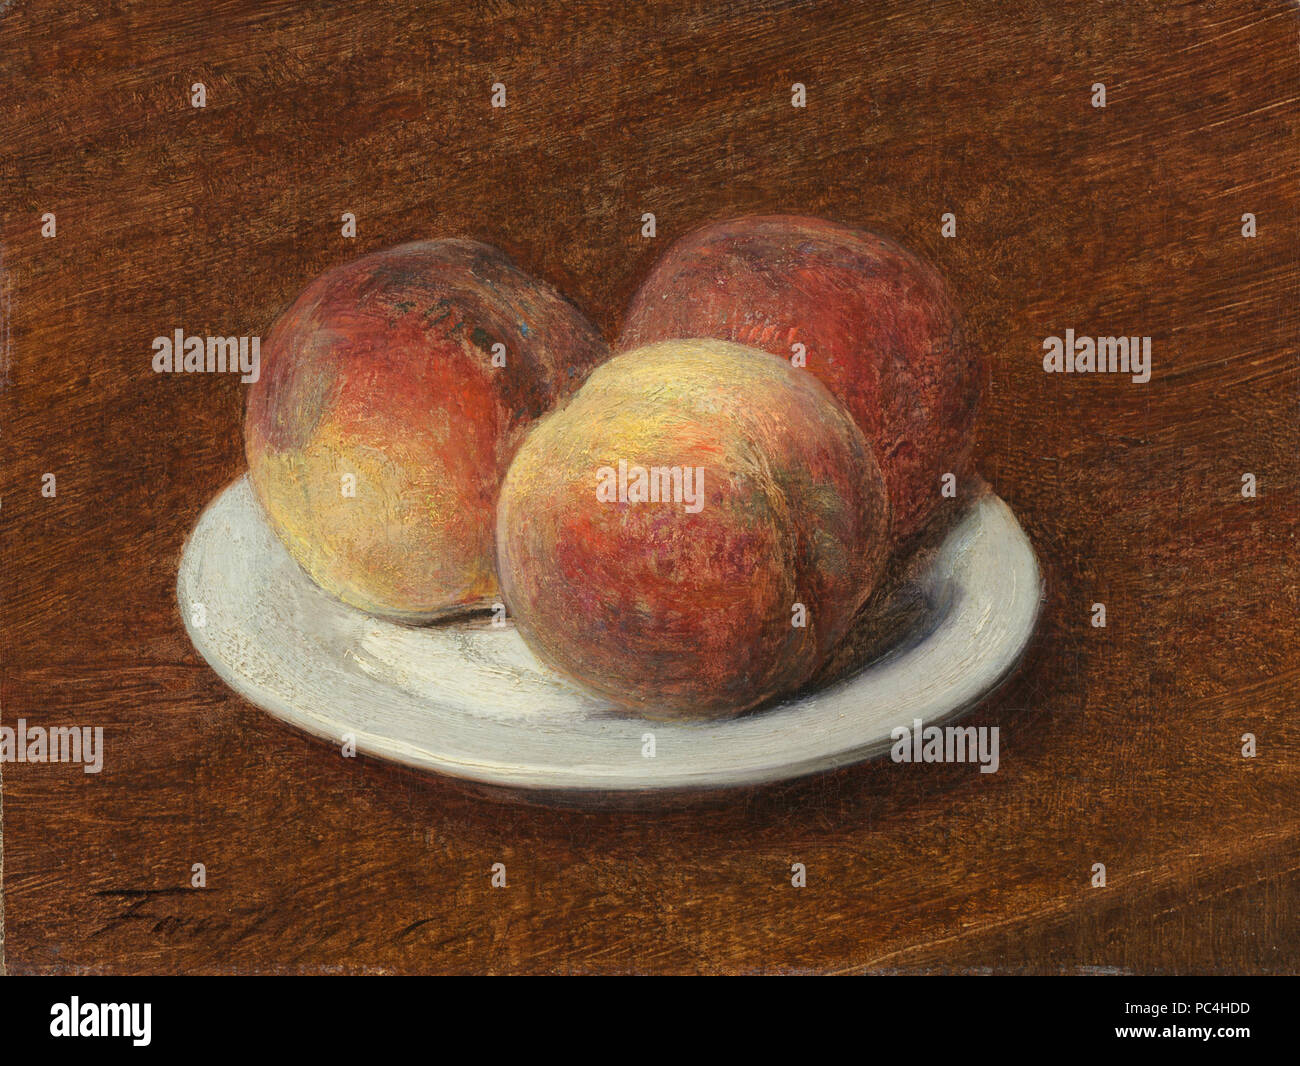 Painting; oil on paper on canvas; overall: 19.7 x 25.7 cm (7 3/4 x 10 1/8 in.) framed: 34.3 x 40.6 x 6.4 cm (13 1/2 x 16 x 2 1/2 in.); 606 Three Peaches on a Plate A14830 Stock Photo